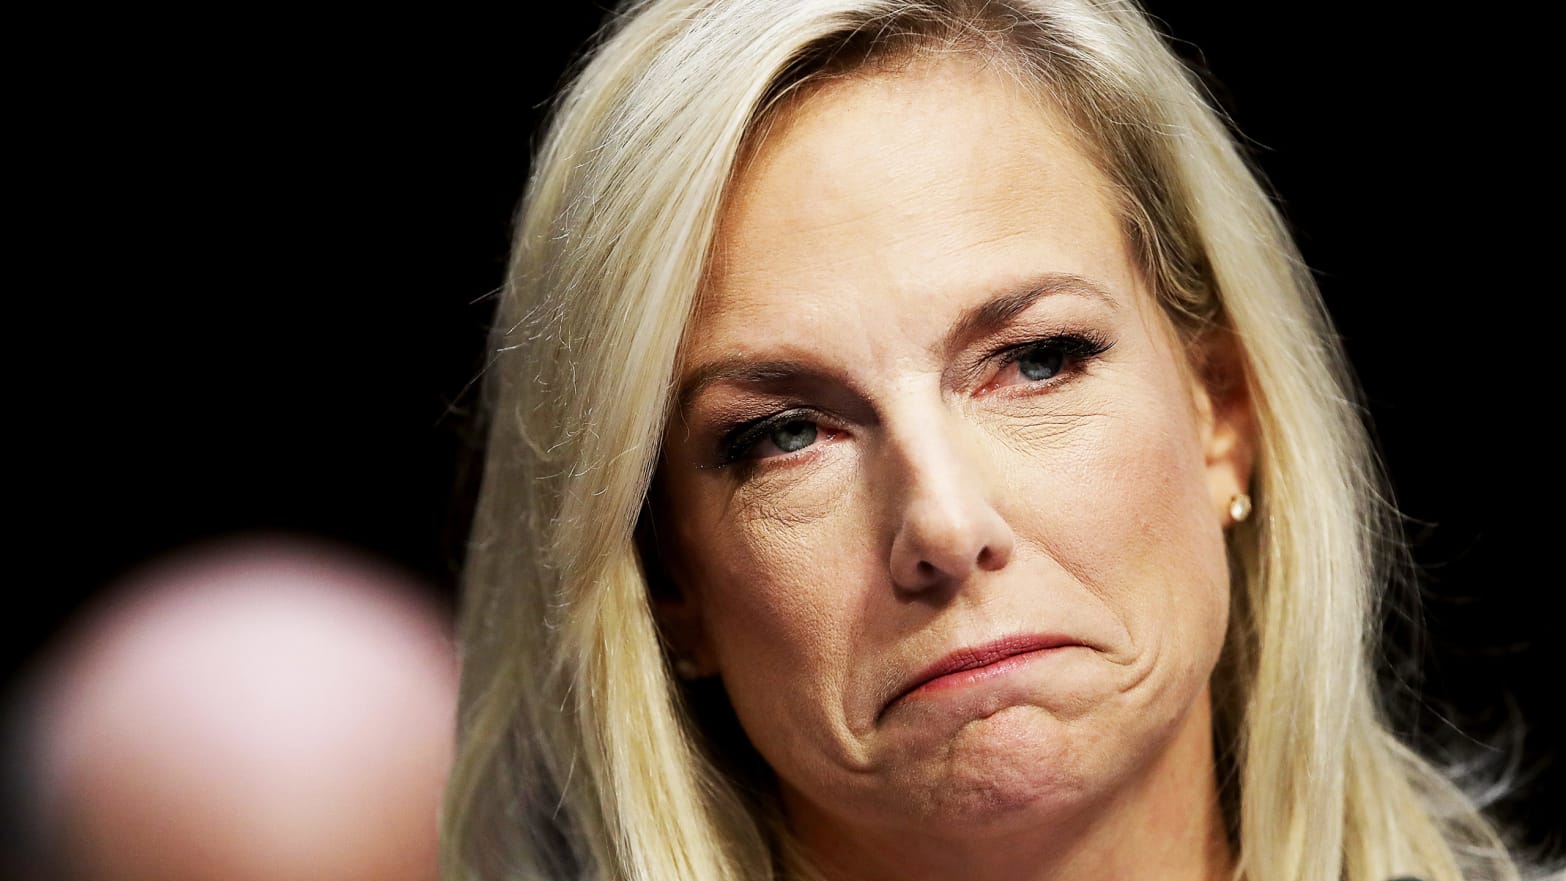 Homeland Security Secretary Kirstjen Nielsen testifies during a hearing held by the Senate Judiciary Committee. Sen. Patrick Leahy and Sen. RIchard Durbin Durbin both questioned Nielsen about derogatory language reportedly used by President Trump.